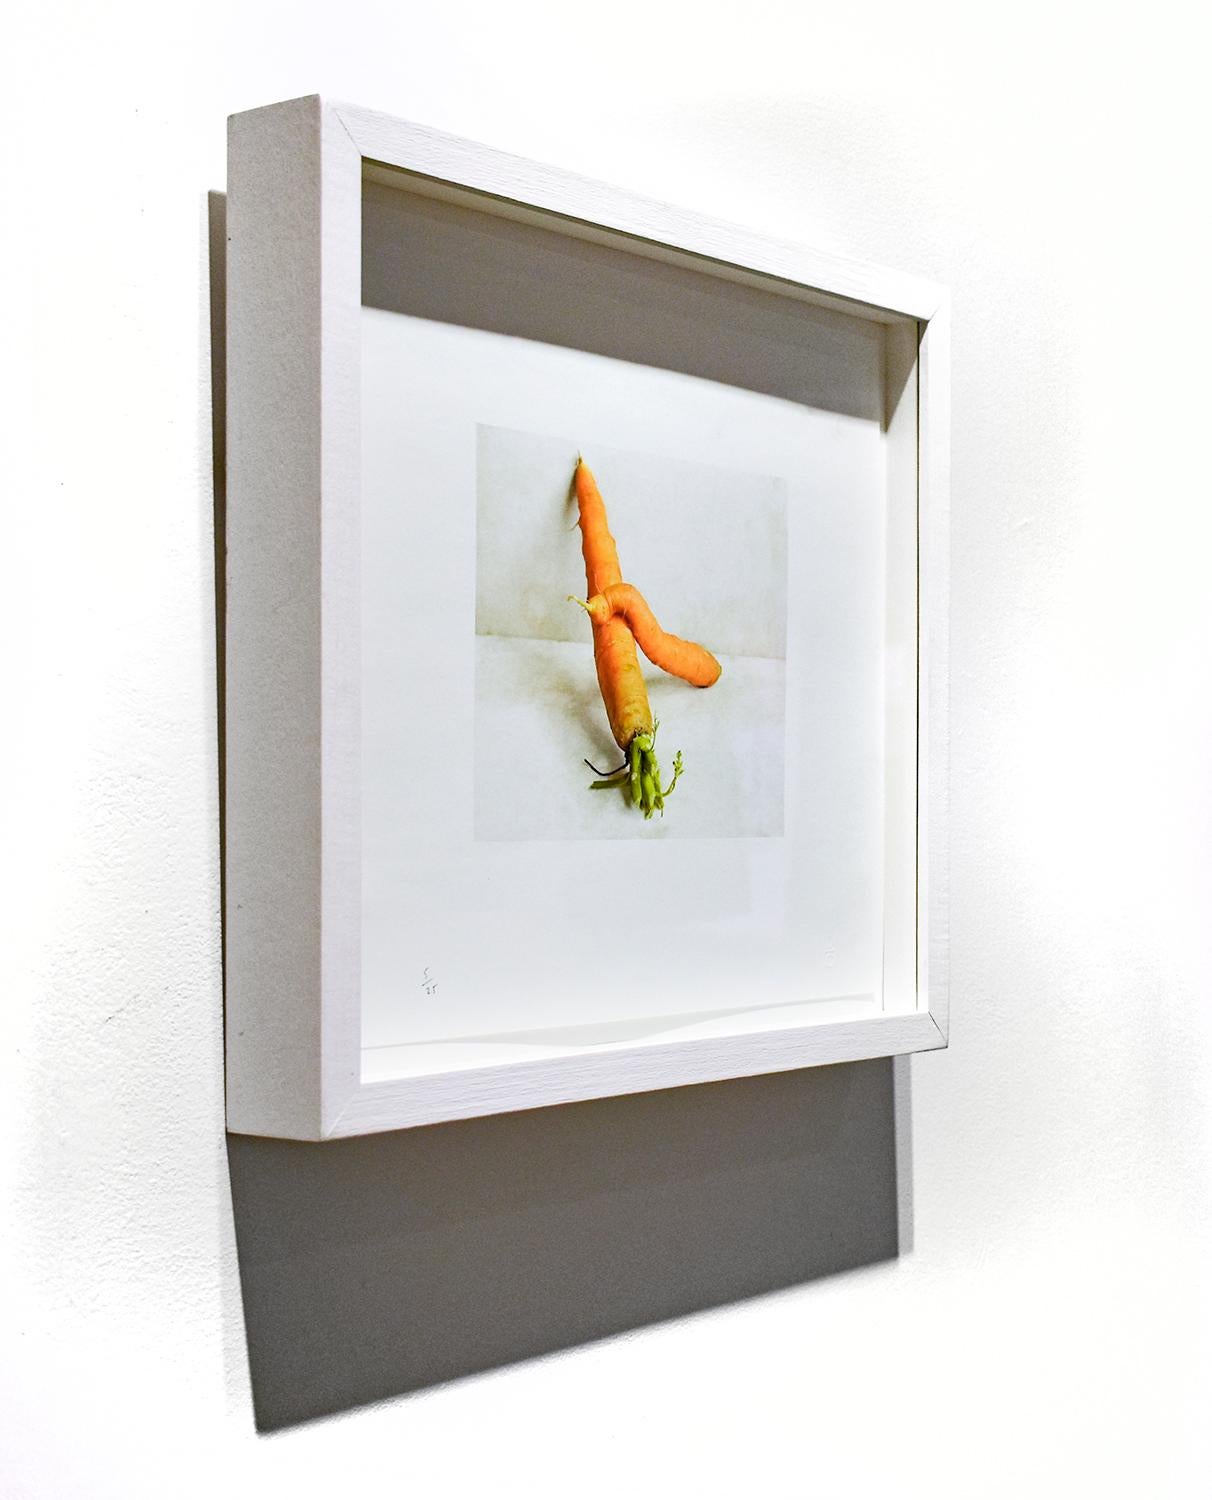 Carrots (Against the Wall) Framed Color Still Life Photograph of Vegetables  - Beige Still-Life Photograph by David Halliday